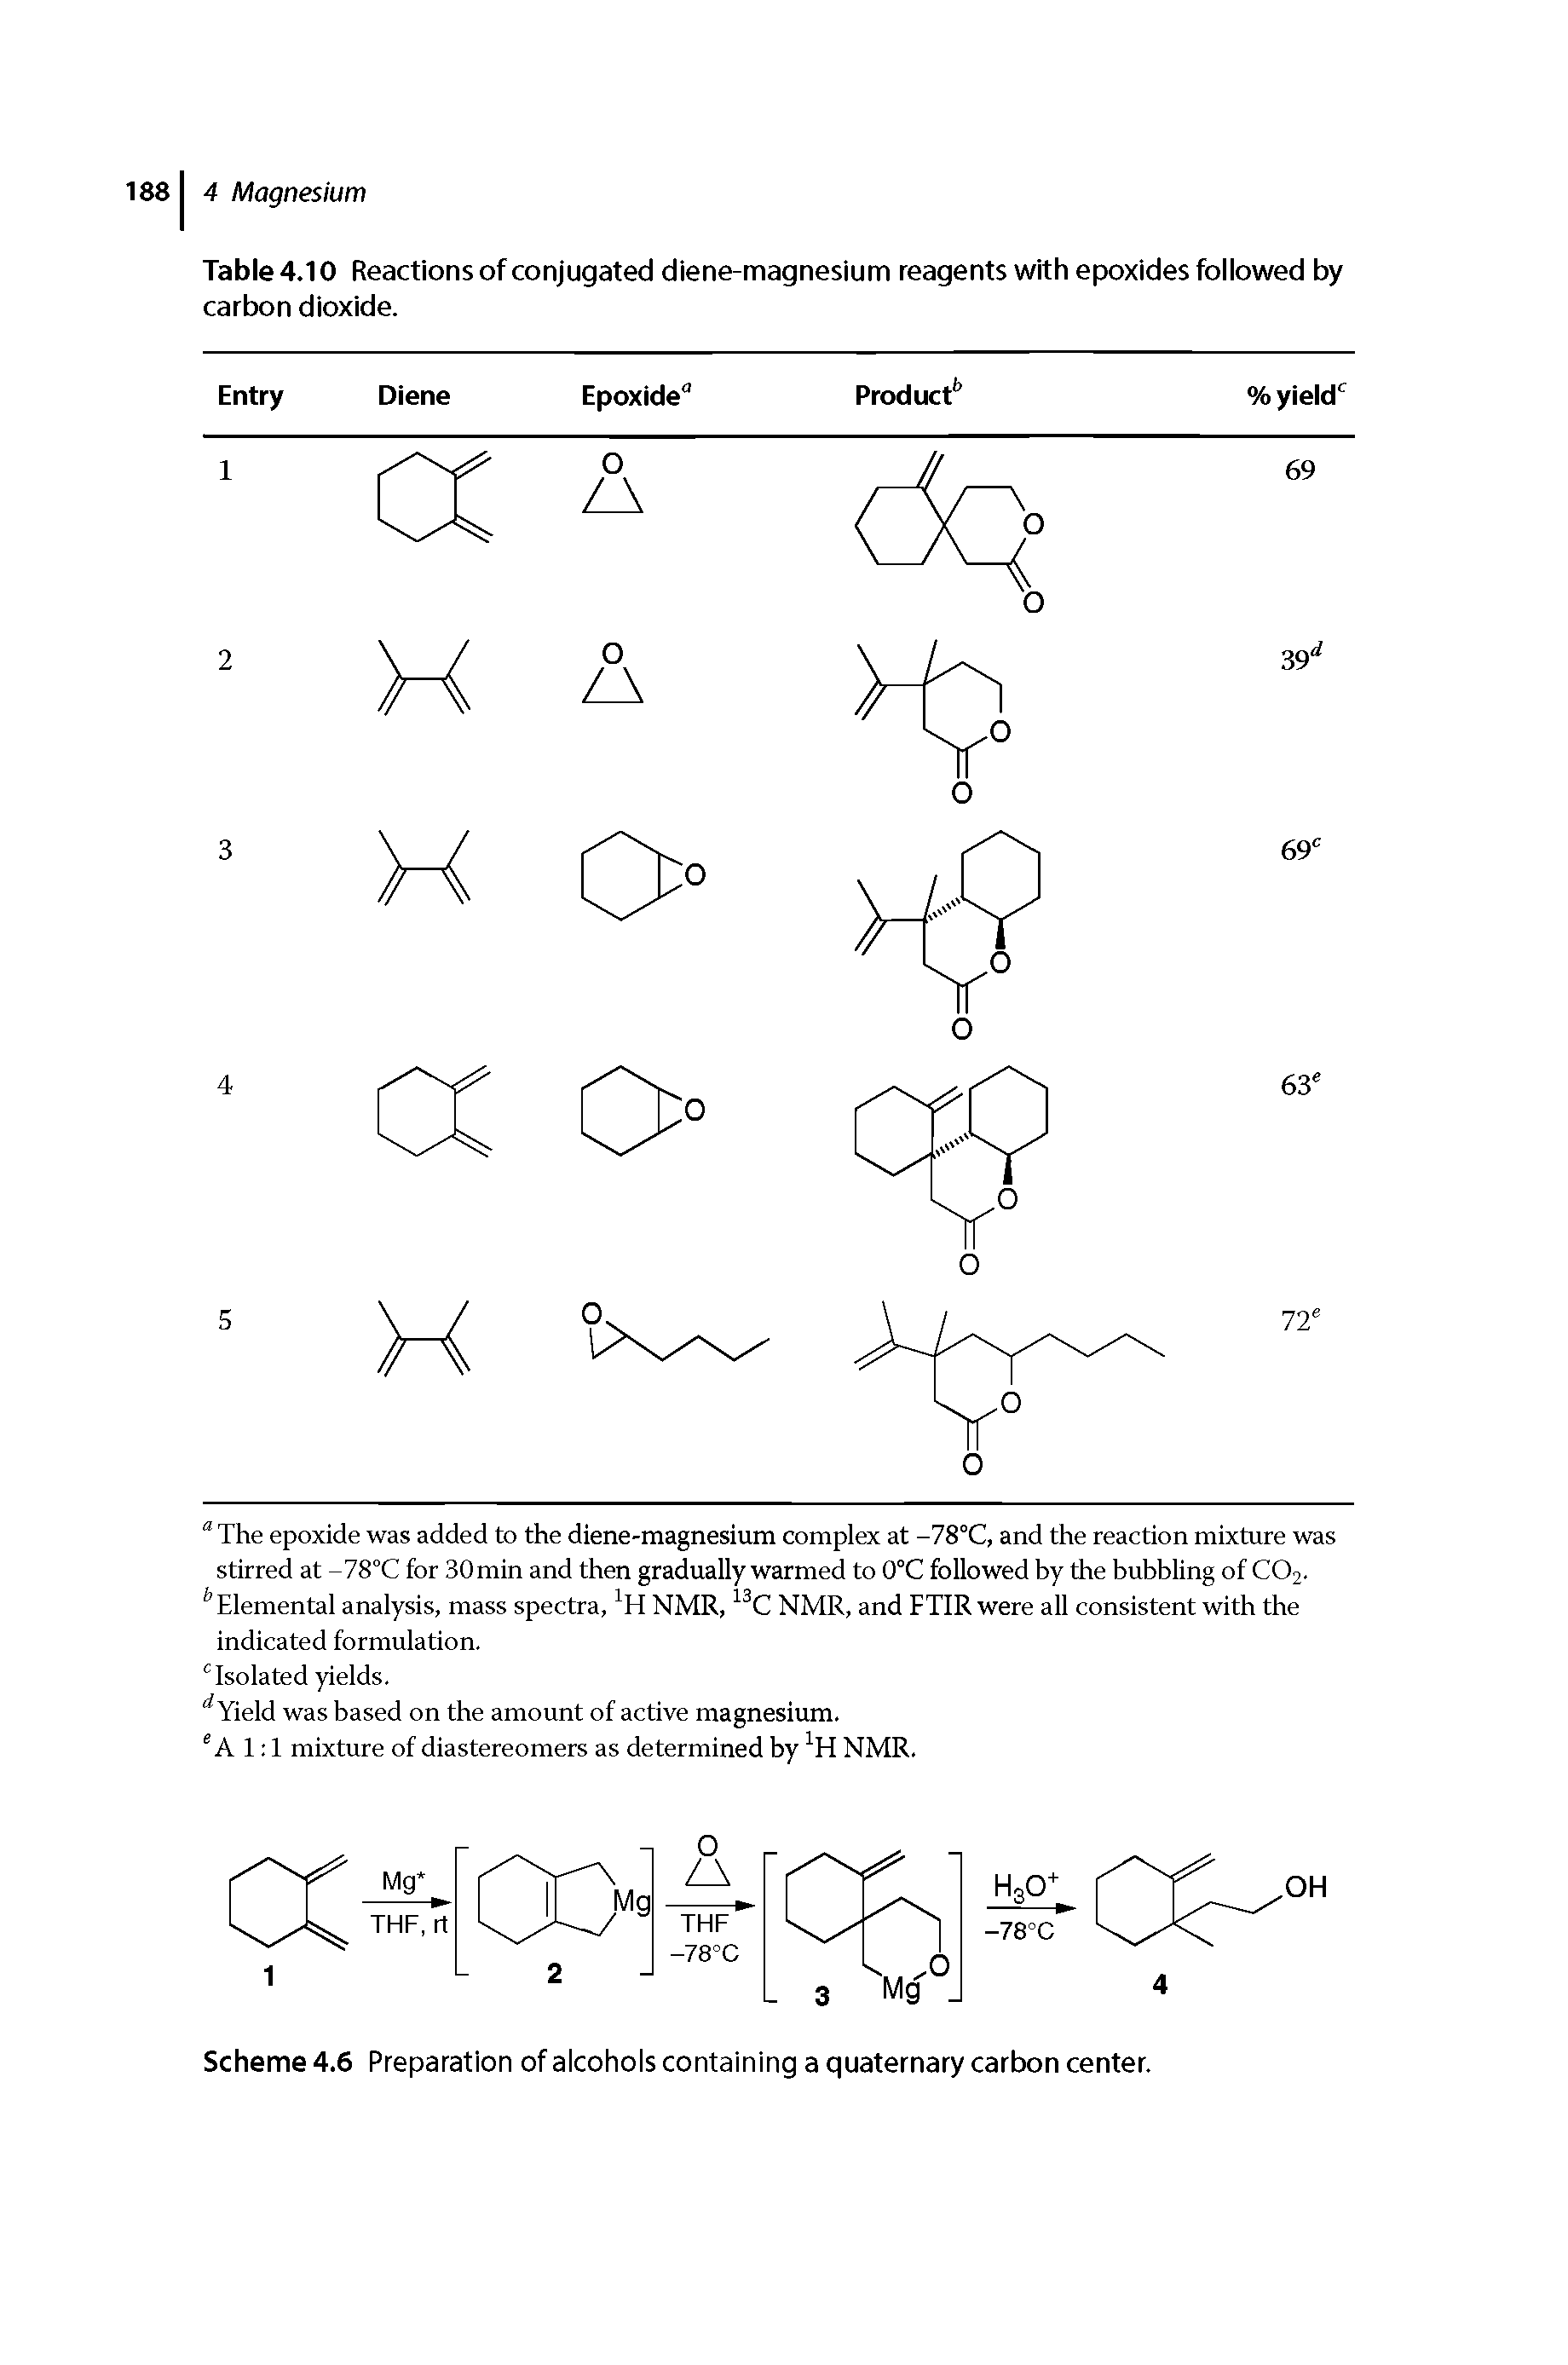 Table 4.10 Reactions of conjugated diene-magnesium reagents with epoxides followed by carbon dioxide.